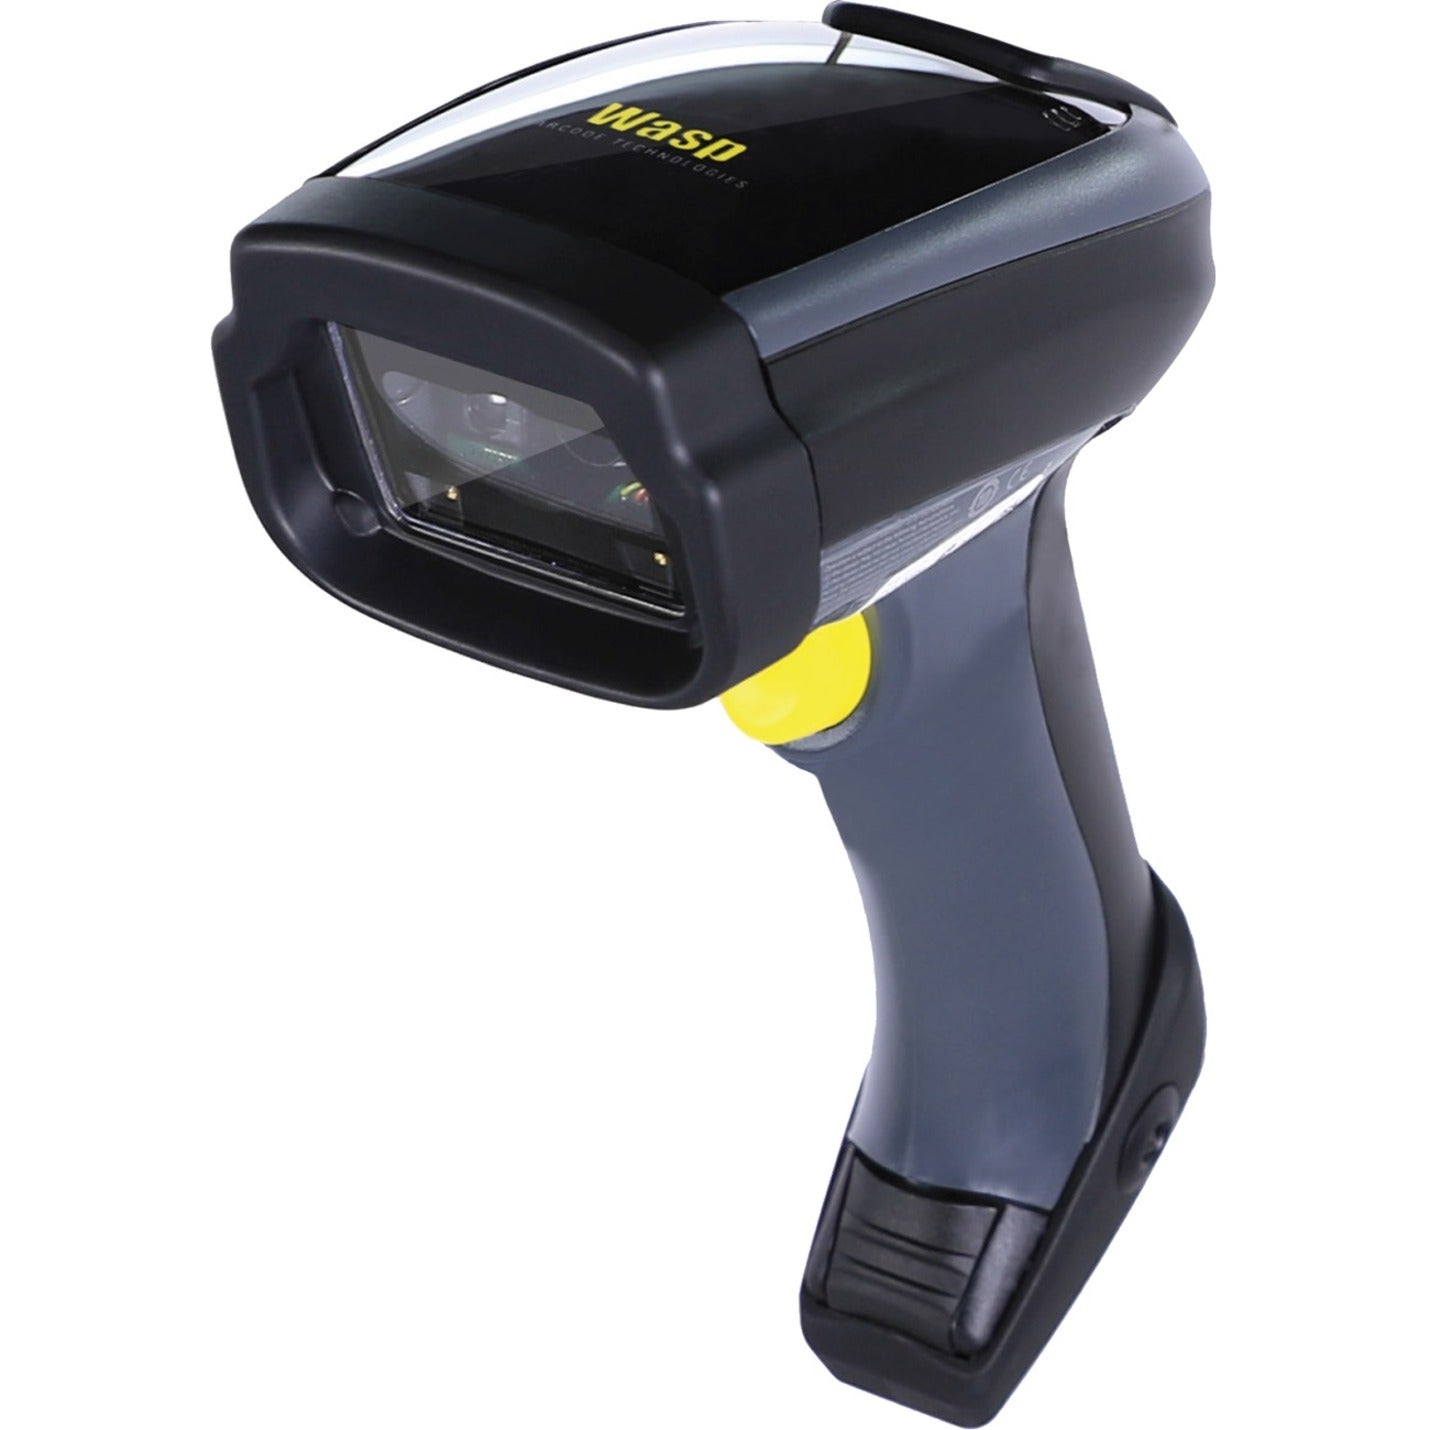 Wasp 633809005541 WWS750 Handheld Barcode Scanner, Wireless 2D and 1D Scanning